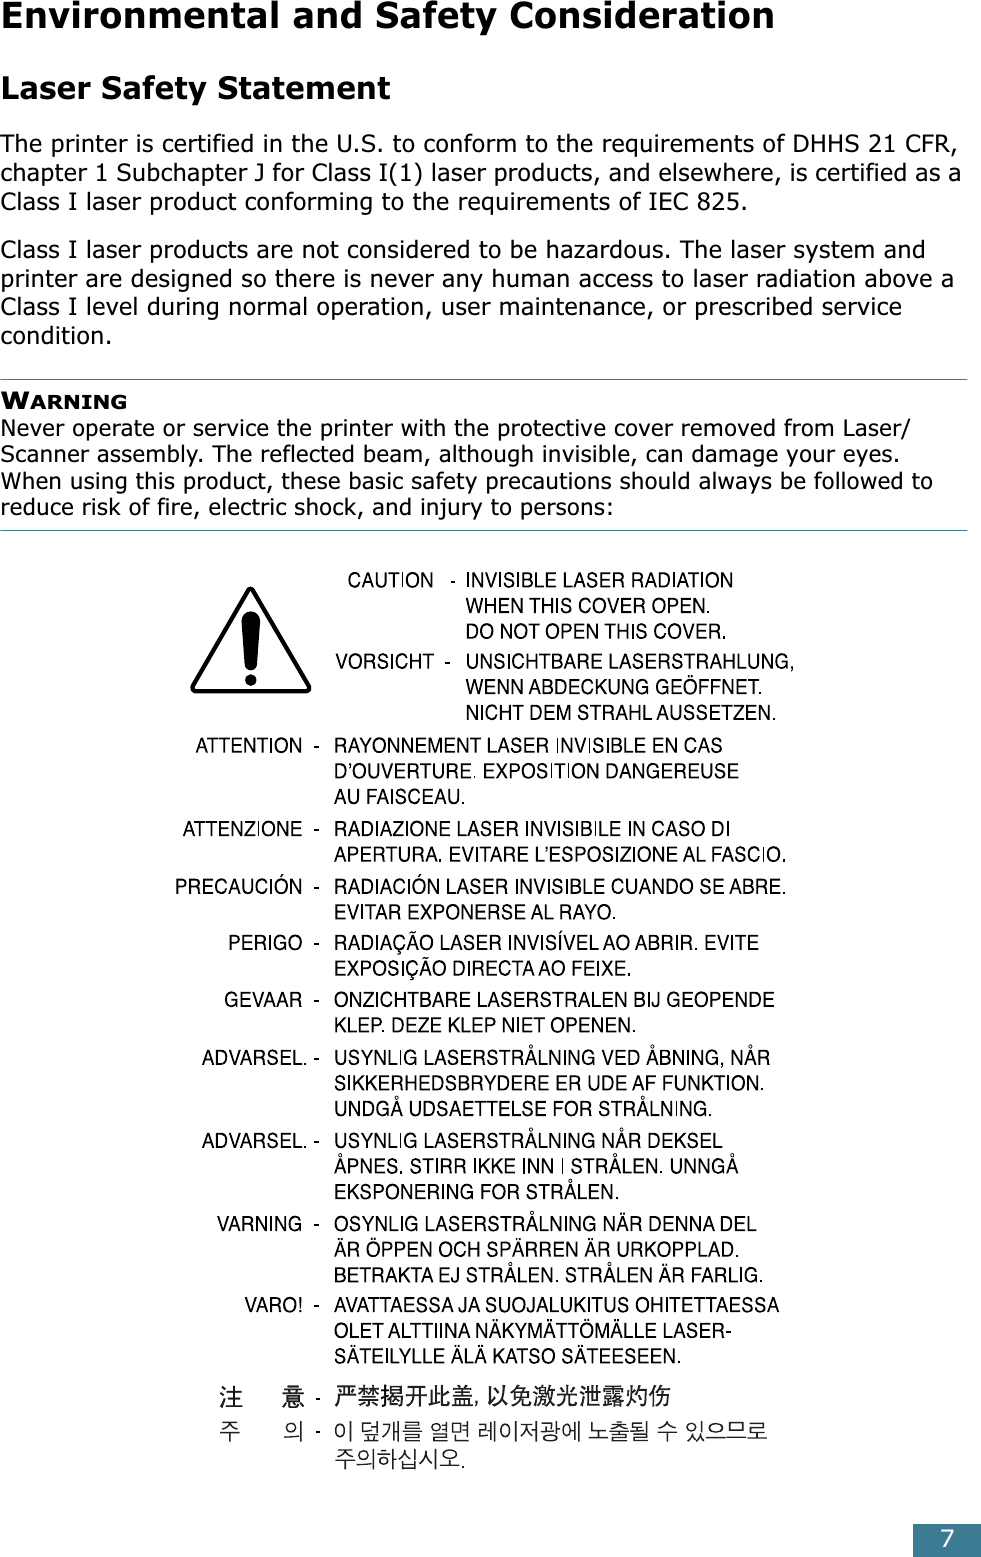  7 Environmental and Safety Consideration Laser Safety Statement The printer is certified in the U.S. to conform to the requirements of DHHS 21 CFR, chapter 1 Subchapter J for Class I(1) laser products, and elsewhere, is certified as a Class I laser product conforming to the requirements of IEC 825.Class I laser products are not considered to be hazardous. The laser system and printer are designed so there is never any human access to laser radiation above a Class I level during normal operation, user maintenance, or prescribed service condition. W ARNING  Never operate or service the printer with the protective cover removed from Laser/Scanner assembly. The reflected beam, although invisible, can damage your eyes.When using this product, these basic safety precautions should always be followed to  reduce risk of fire, electric shock, and injury to persons: